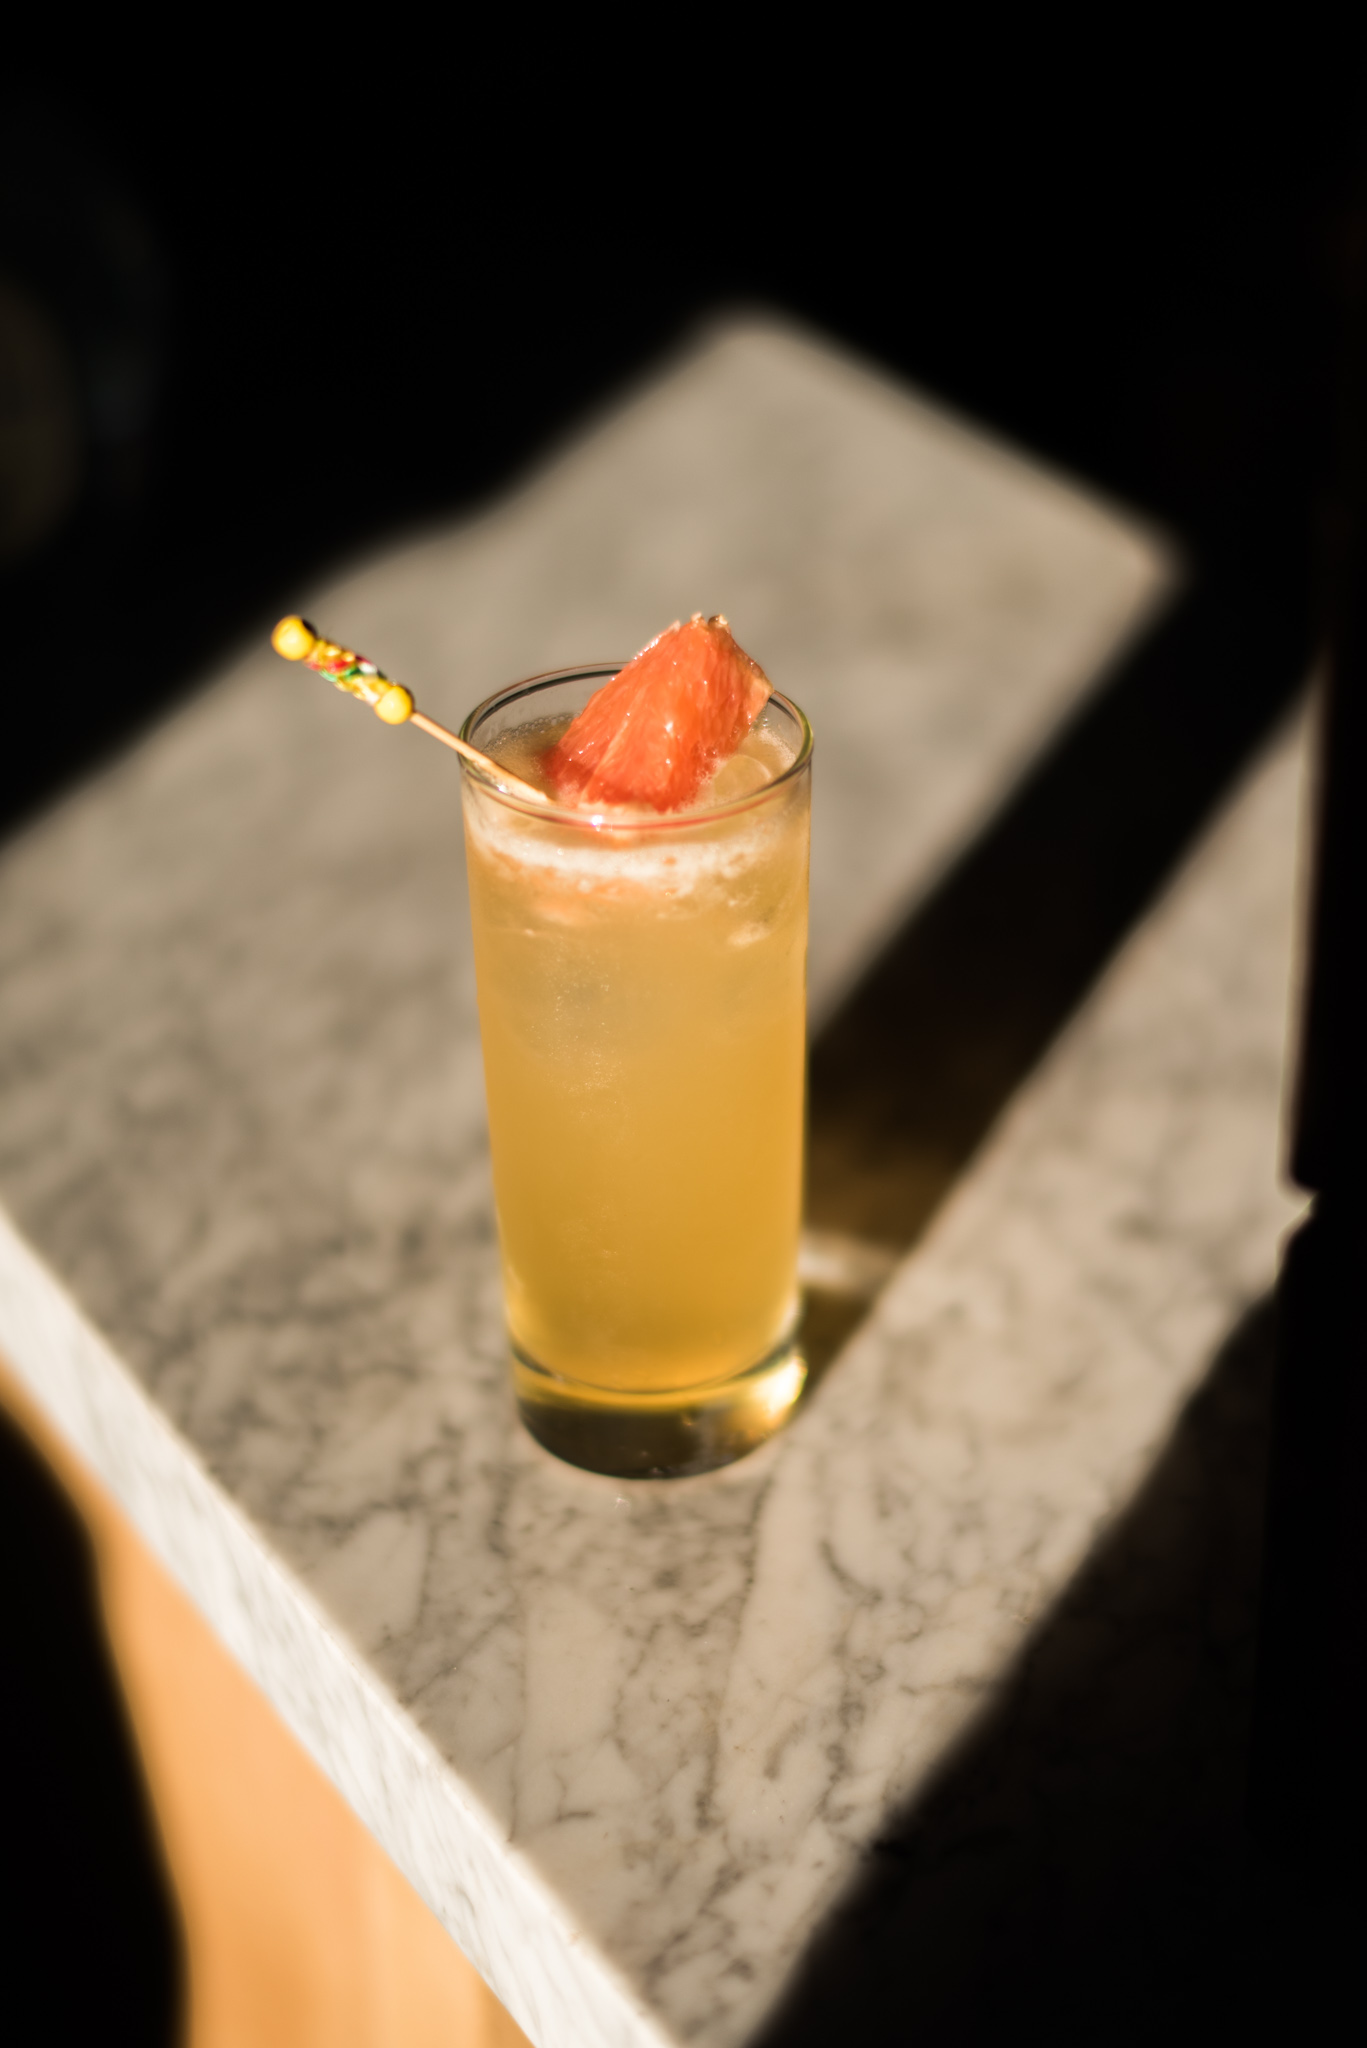 Detail of a cocktail created in partnership with Don Julio Tequila